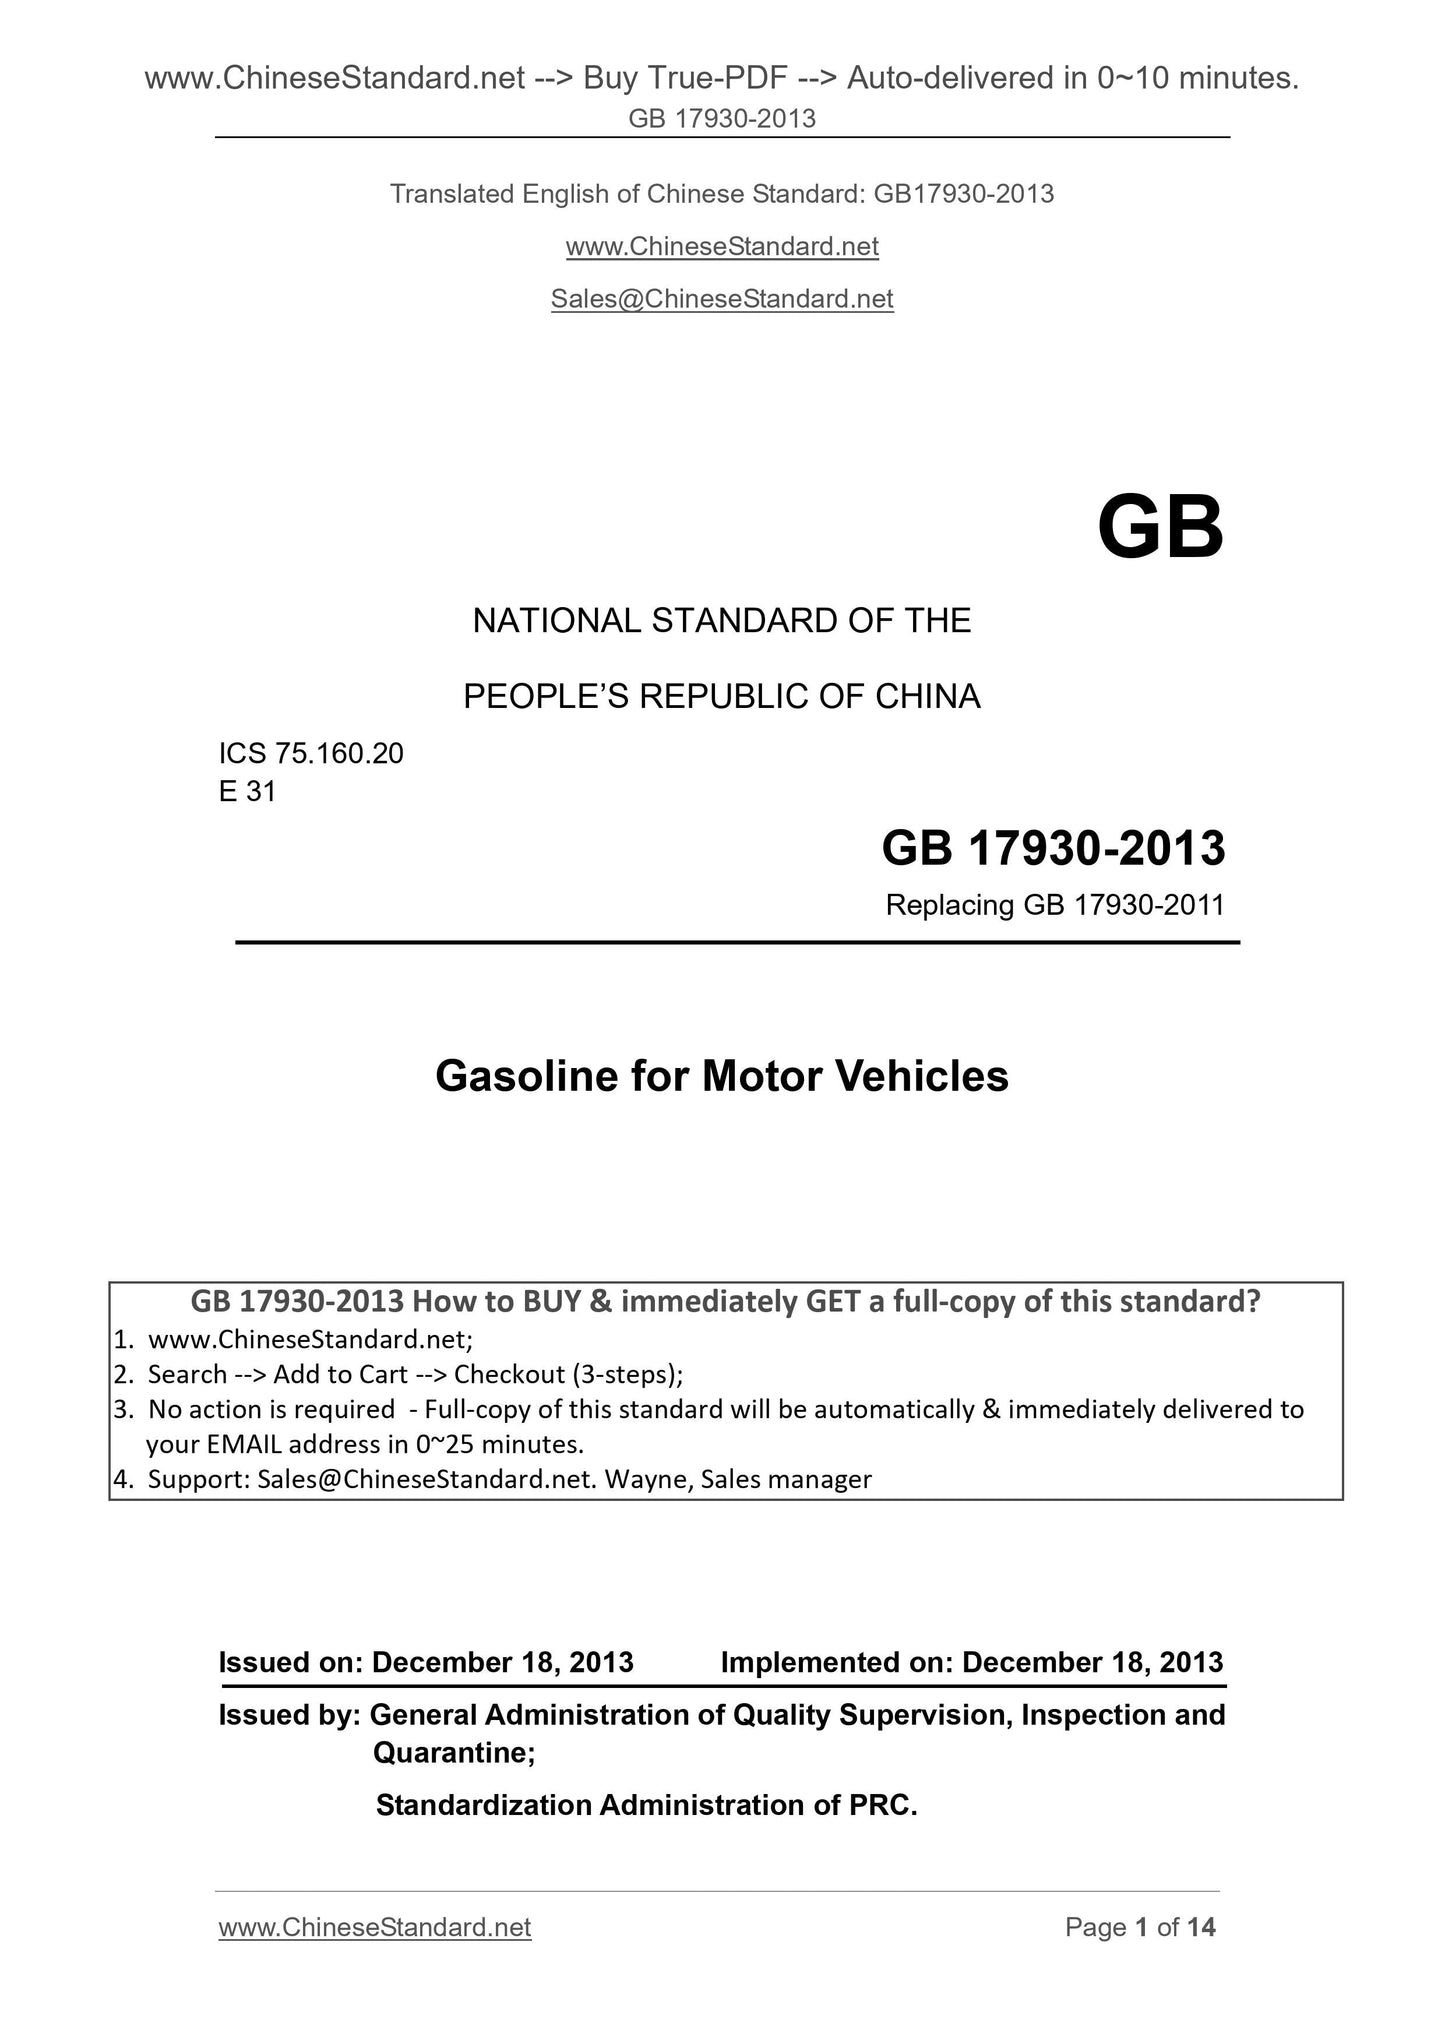 GB 17930-2013 Page 1